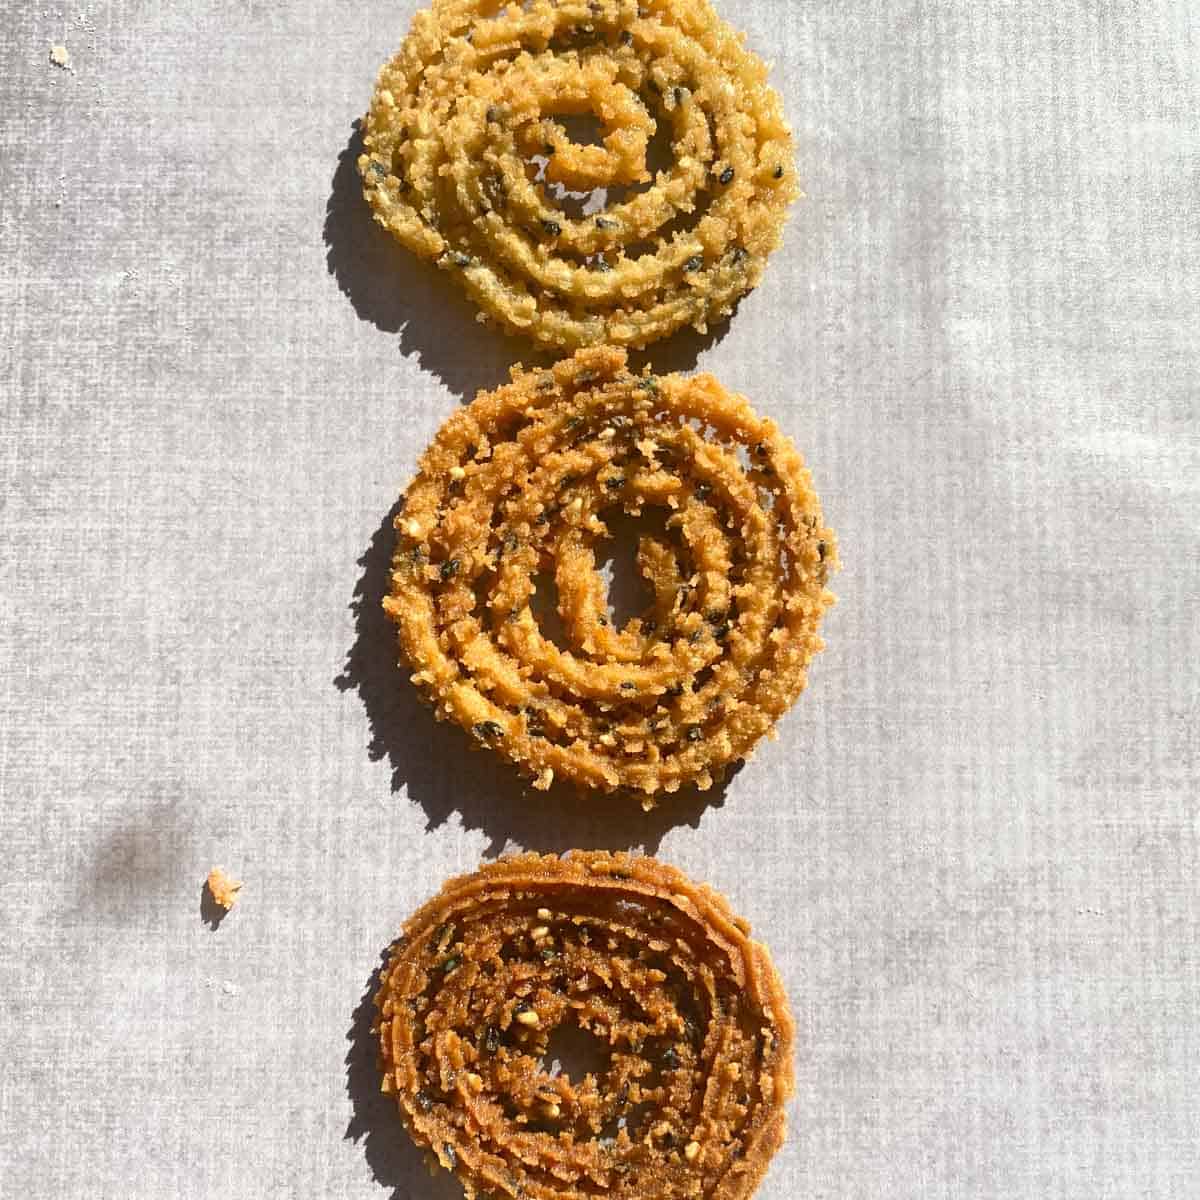 Picture of three murukkus of different shades. Top is undercooked, middle is properly cooked, and the bottom is overcooked